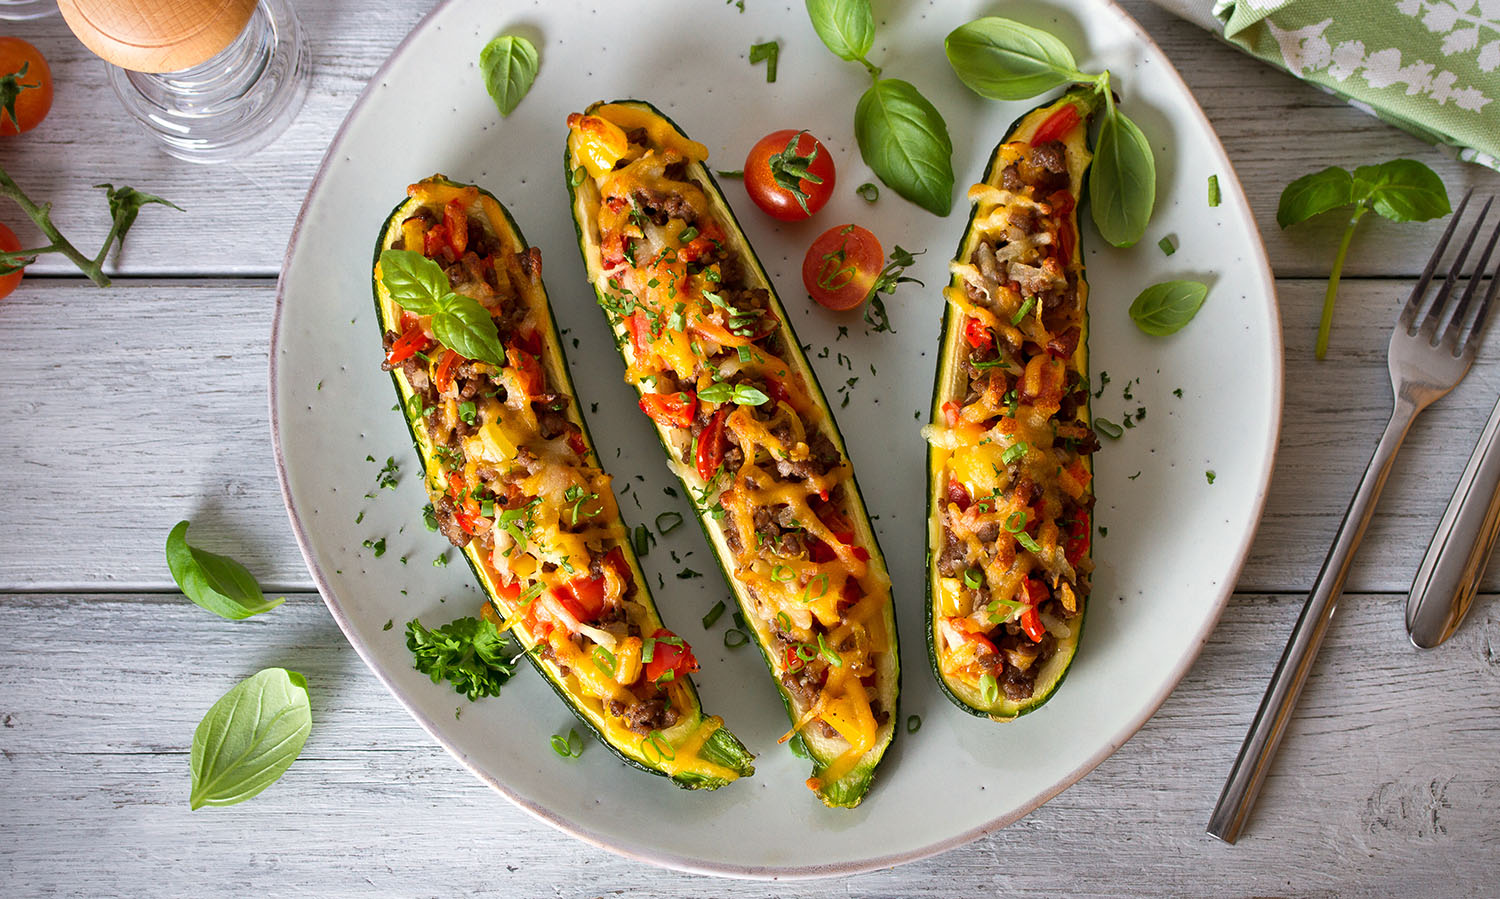 Zucchini stuffed with meat, vegetables and cheese. Zucchini boats. Loaded zucchini. overhead horizontal image